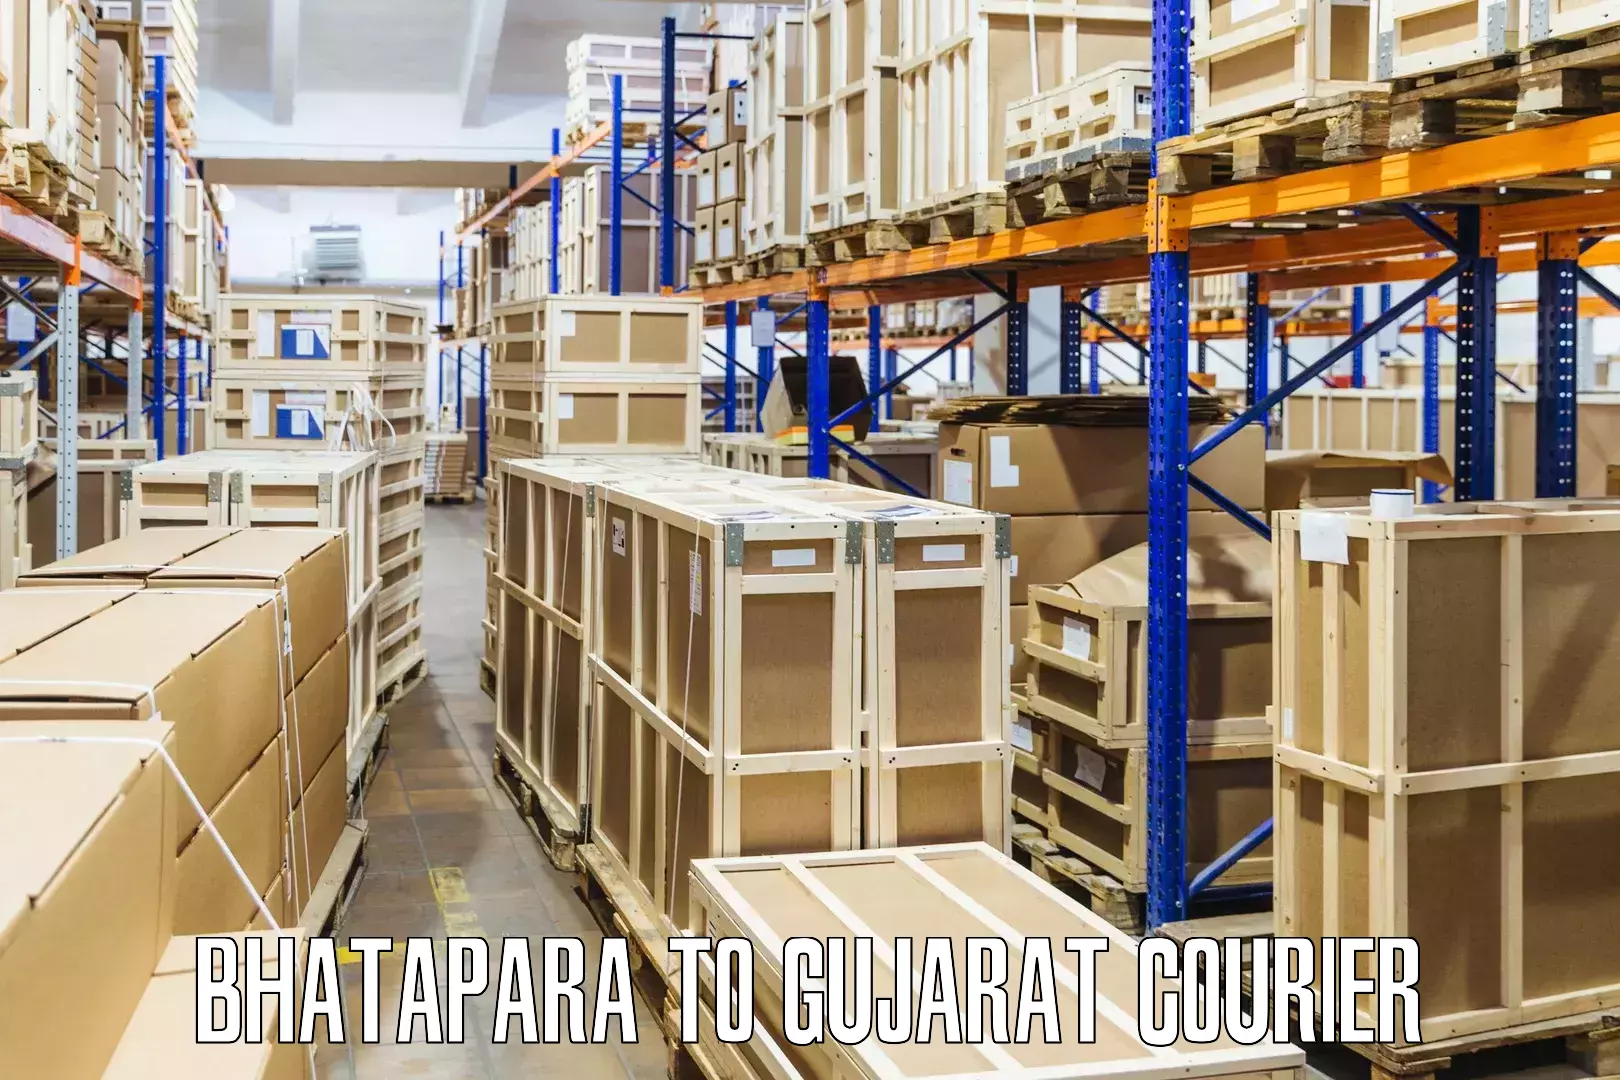 Premium courier solutions Bhatapara to Sihor